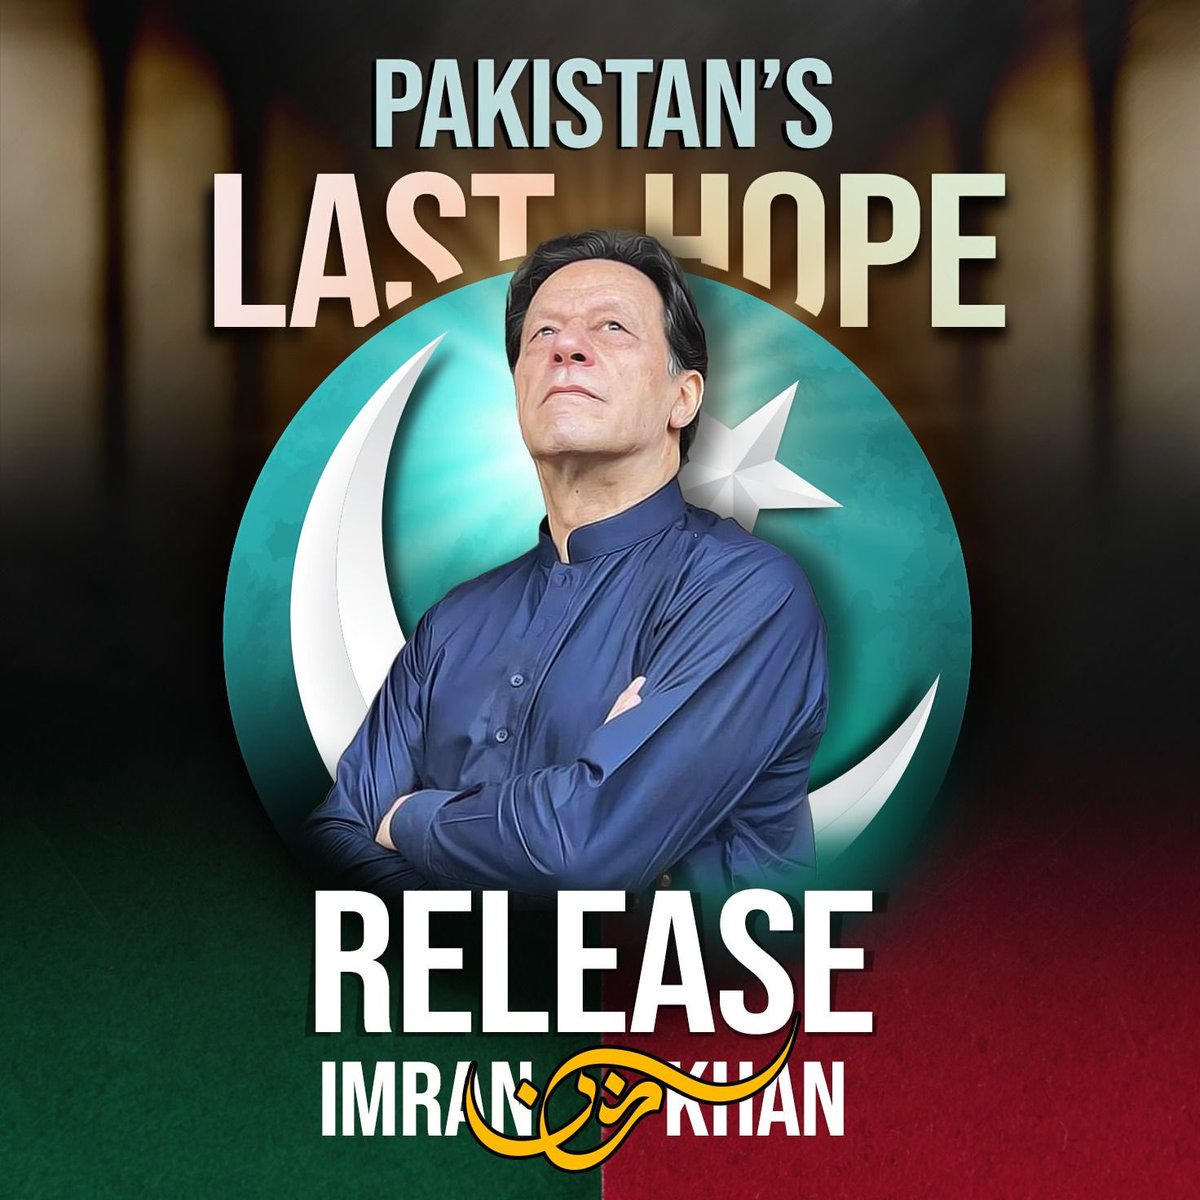 Imran Khan is innocent & must be released.
Stop mockery of the system.
Time for the rule of law.

#ReleaseImranKhan